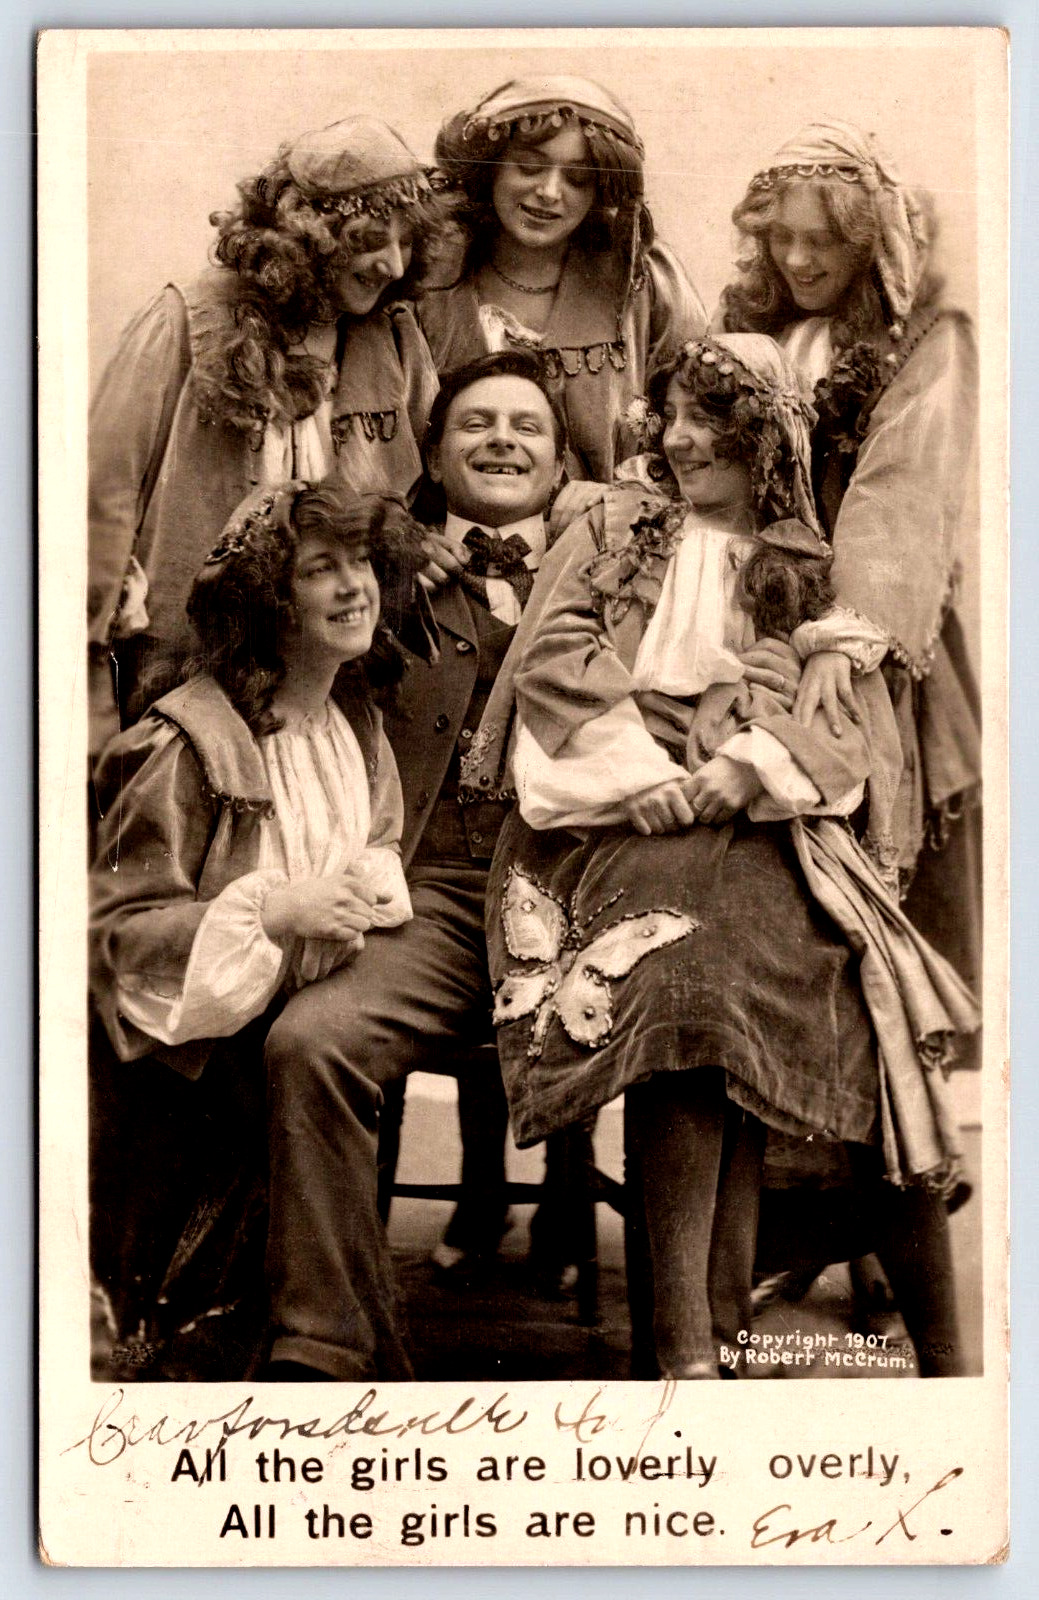 RPPC 1907 Laughing Man with 5 Gypsy Costumed Ladies Perhaps Actors? A19